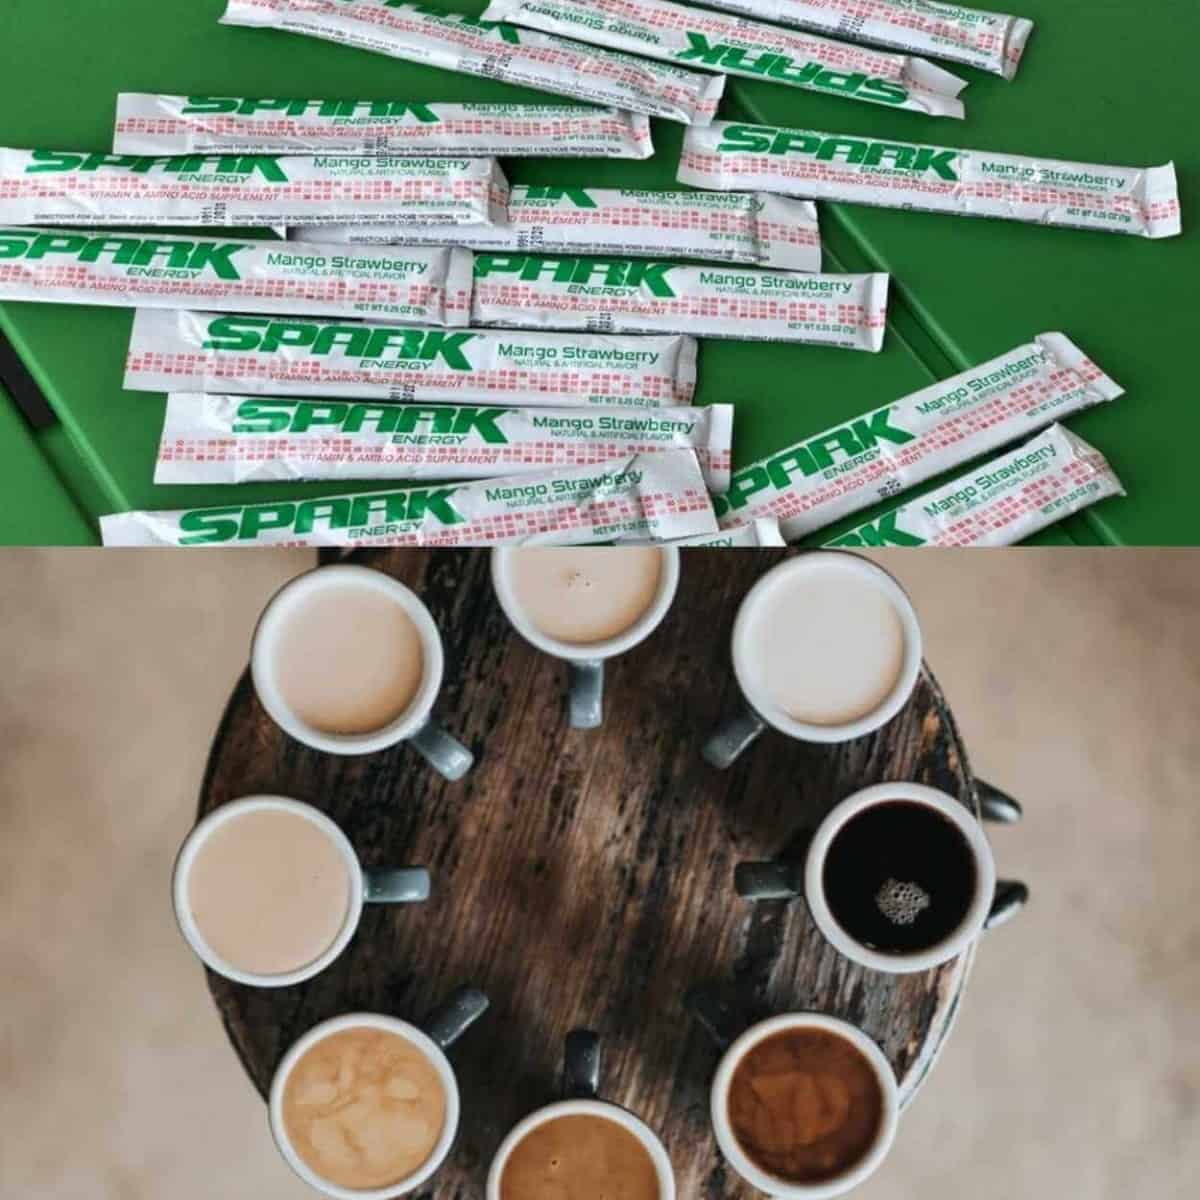 Comparison image of coffee and Spark